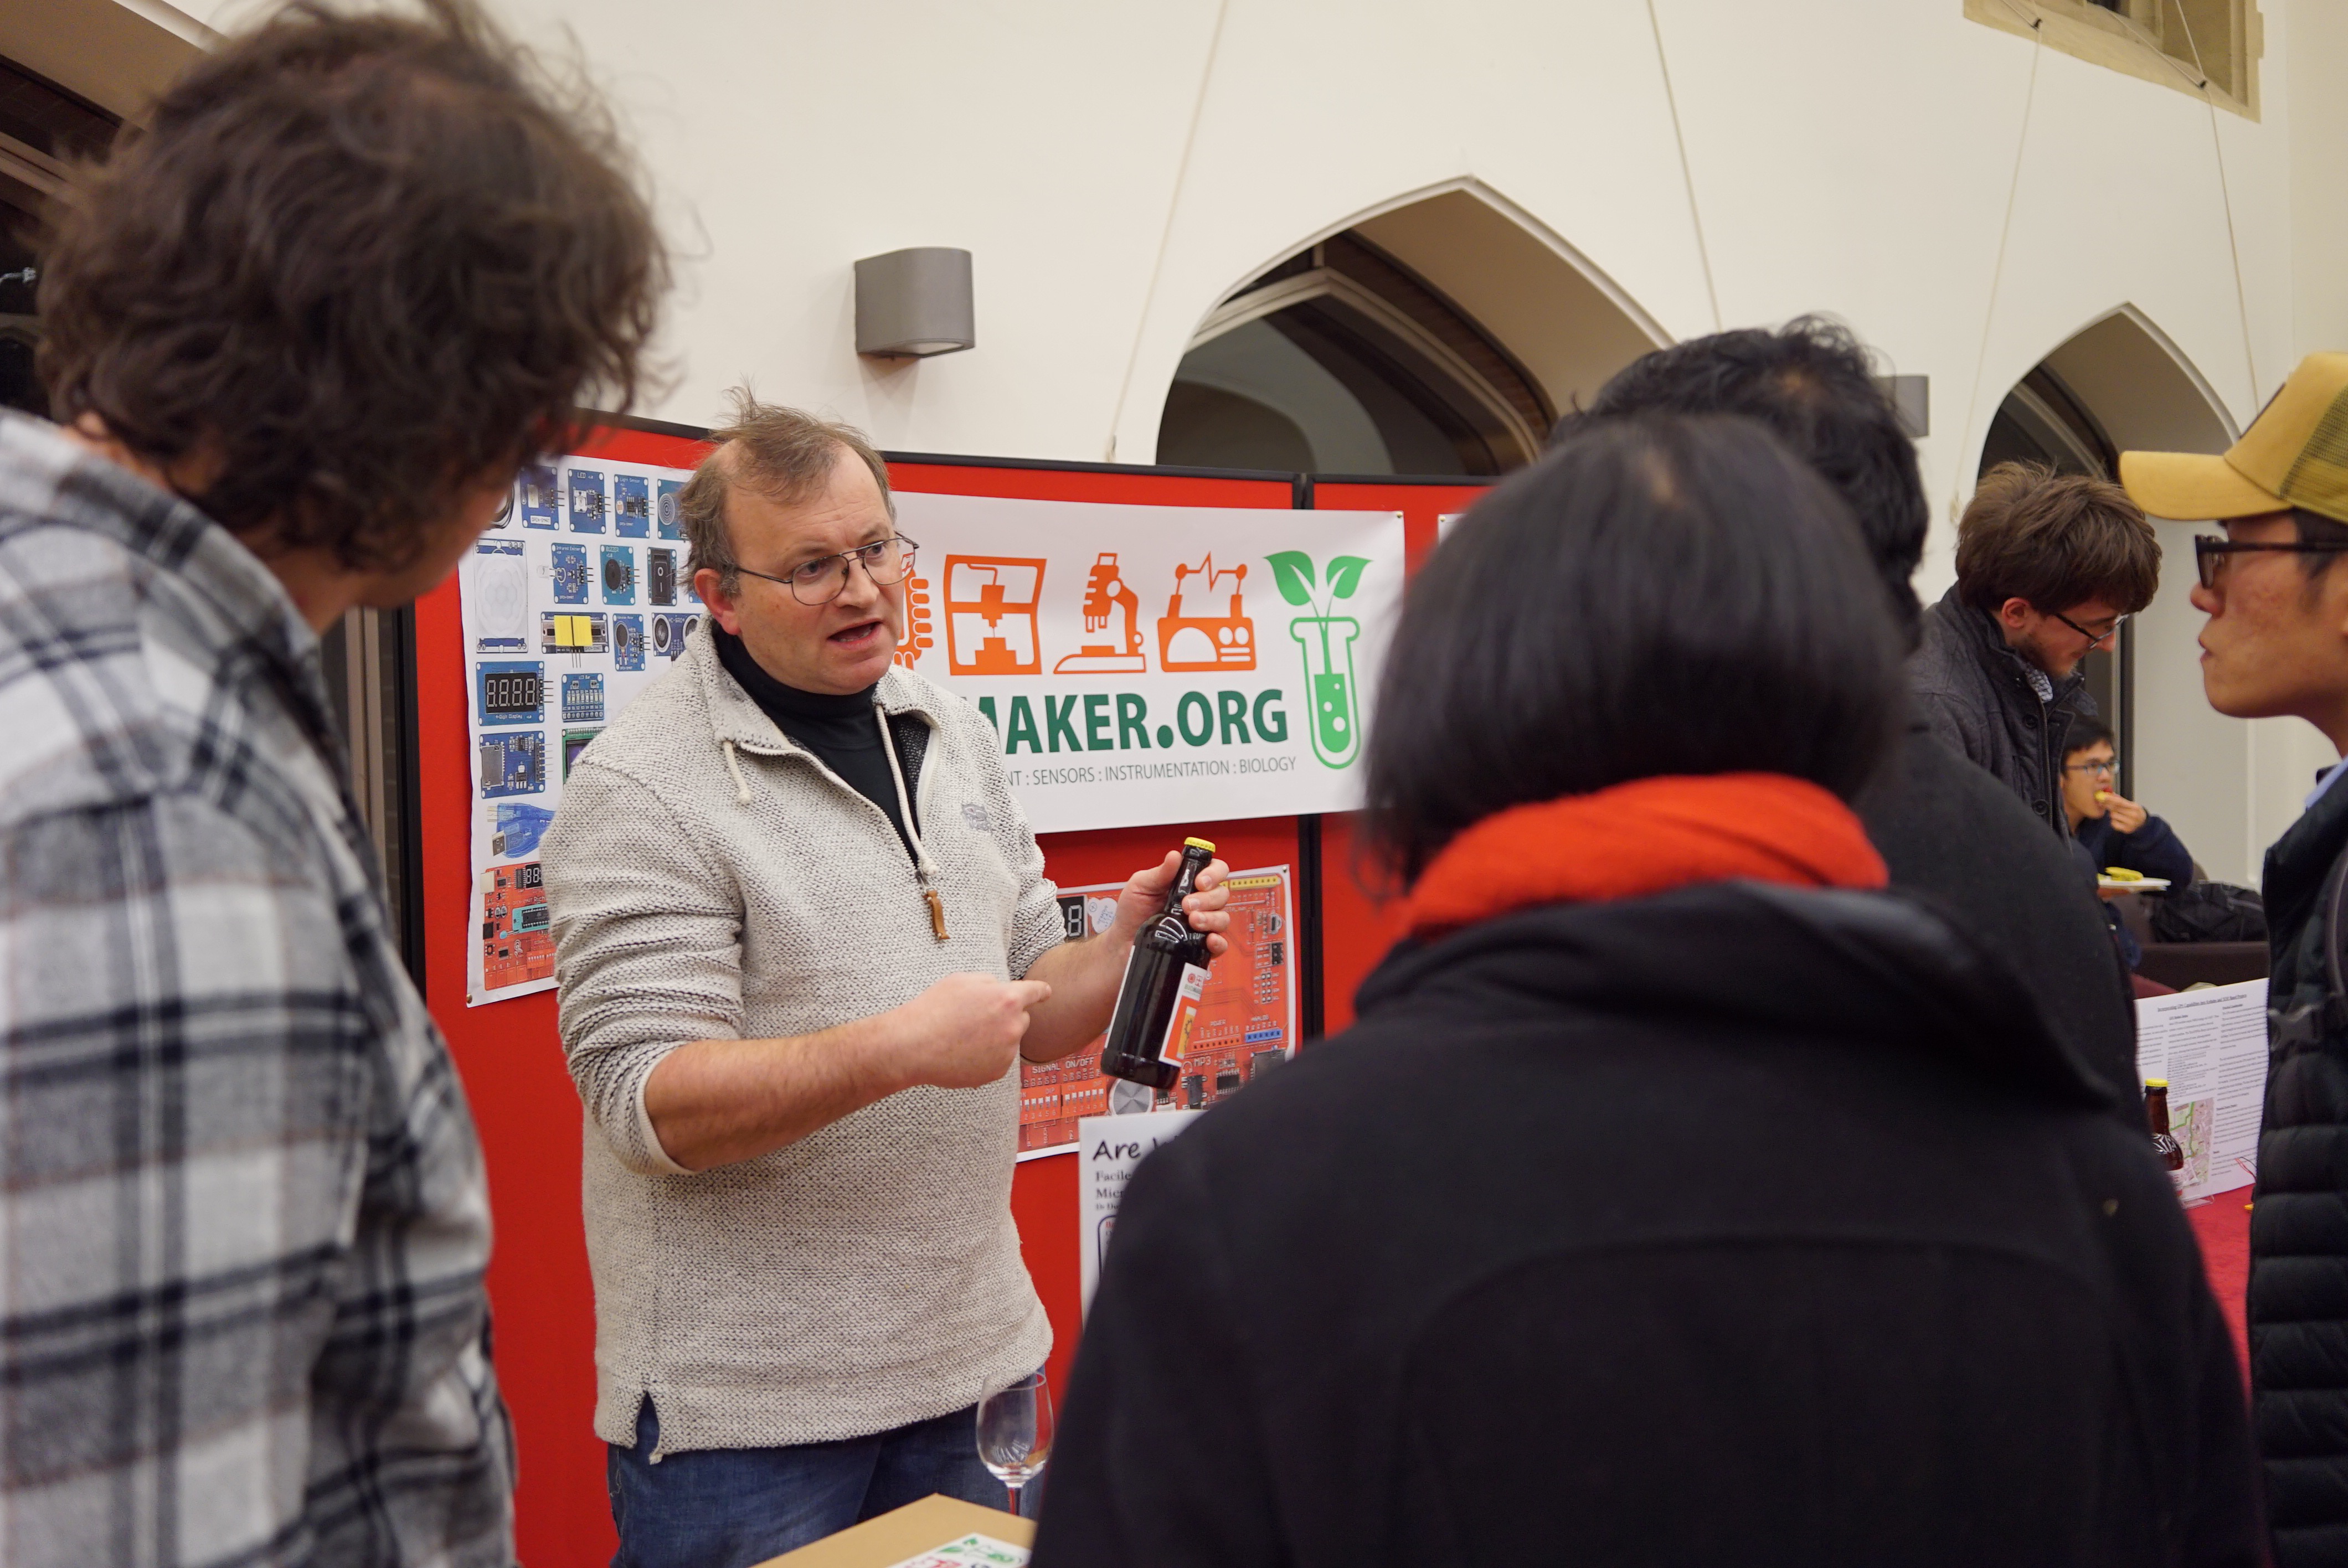 A man stands in front of a poster board with Biomaker branding. He is talking to four people who are facing away from the camera